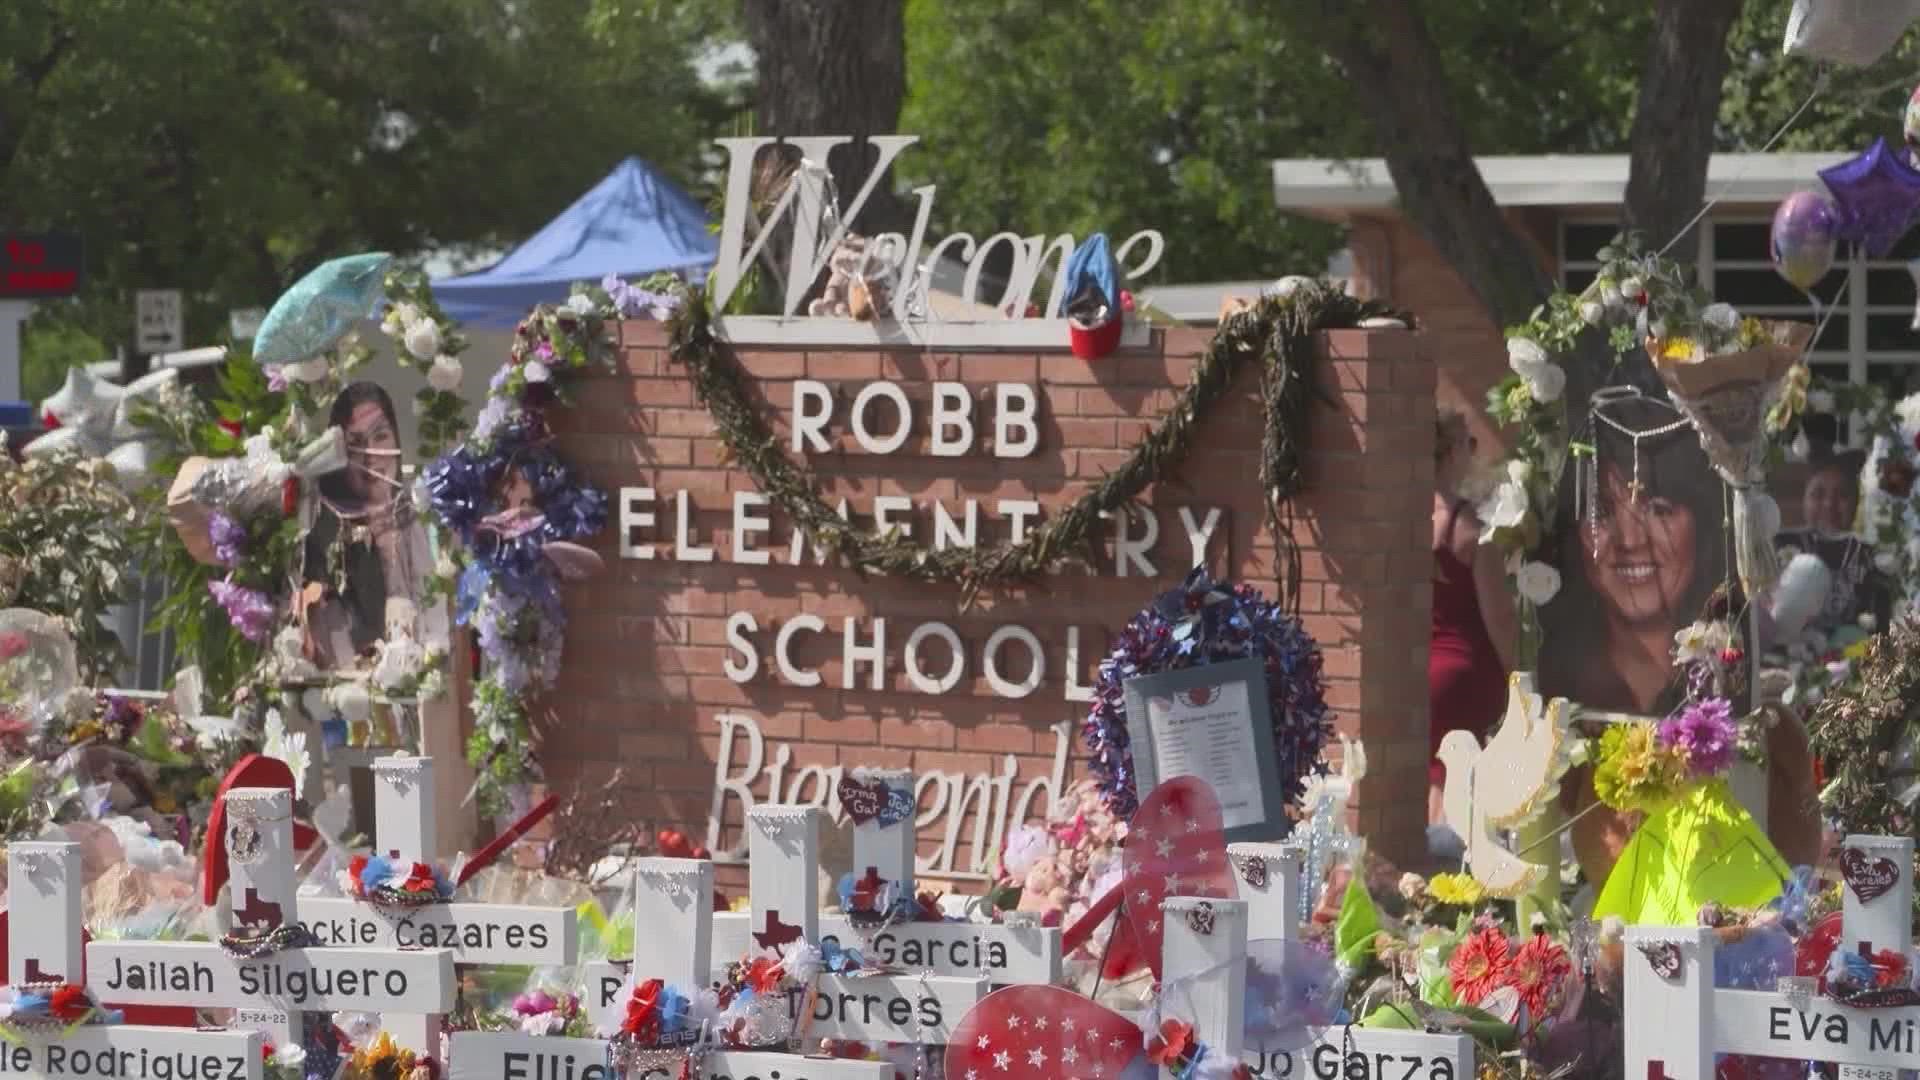 The Texas House Committee highlighted failures by law enforcement and school security that contributed to the catastrophic loss of life at Robb.